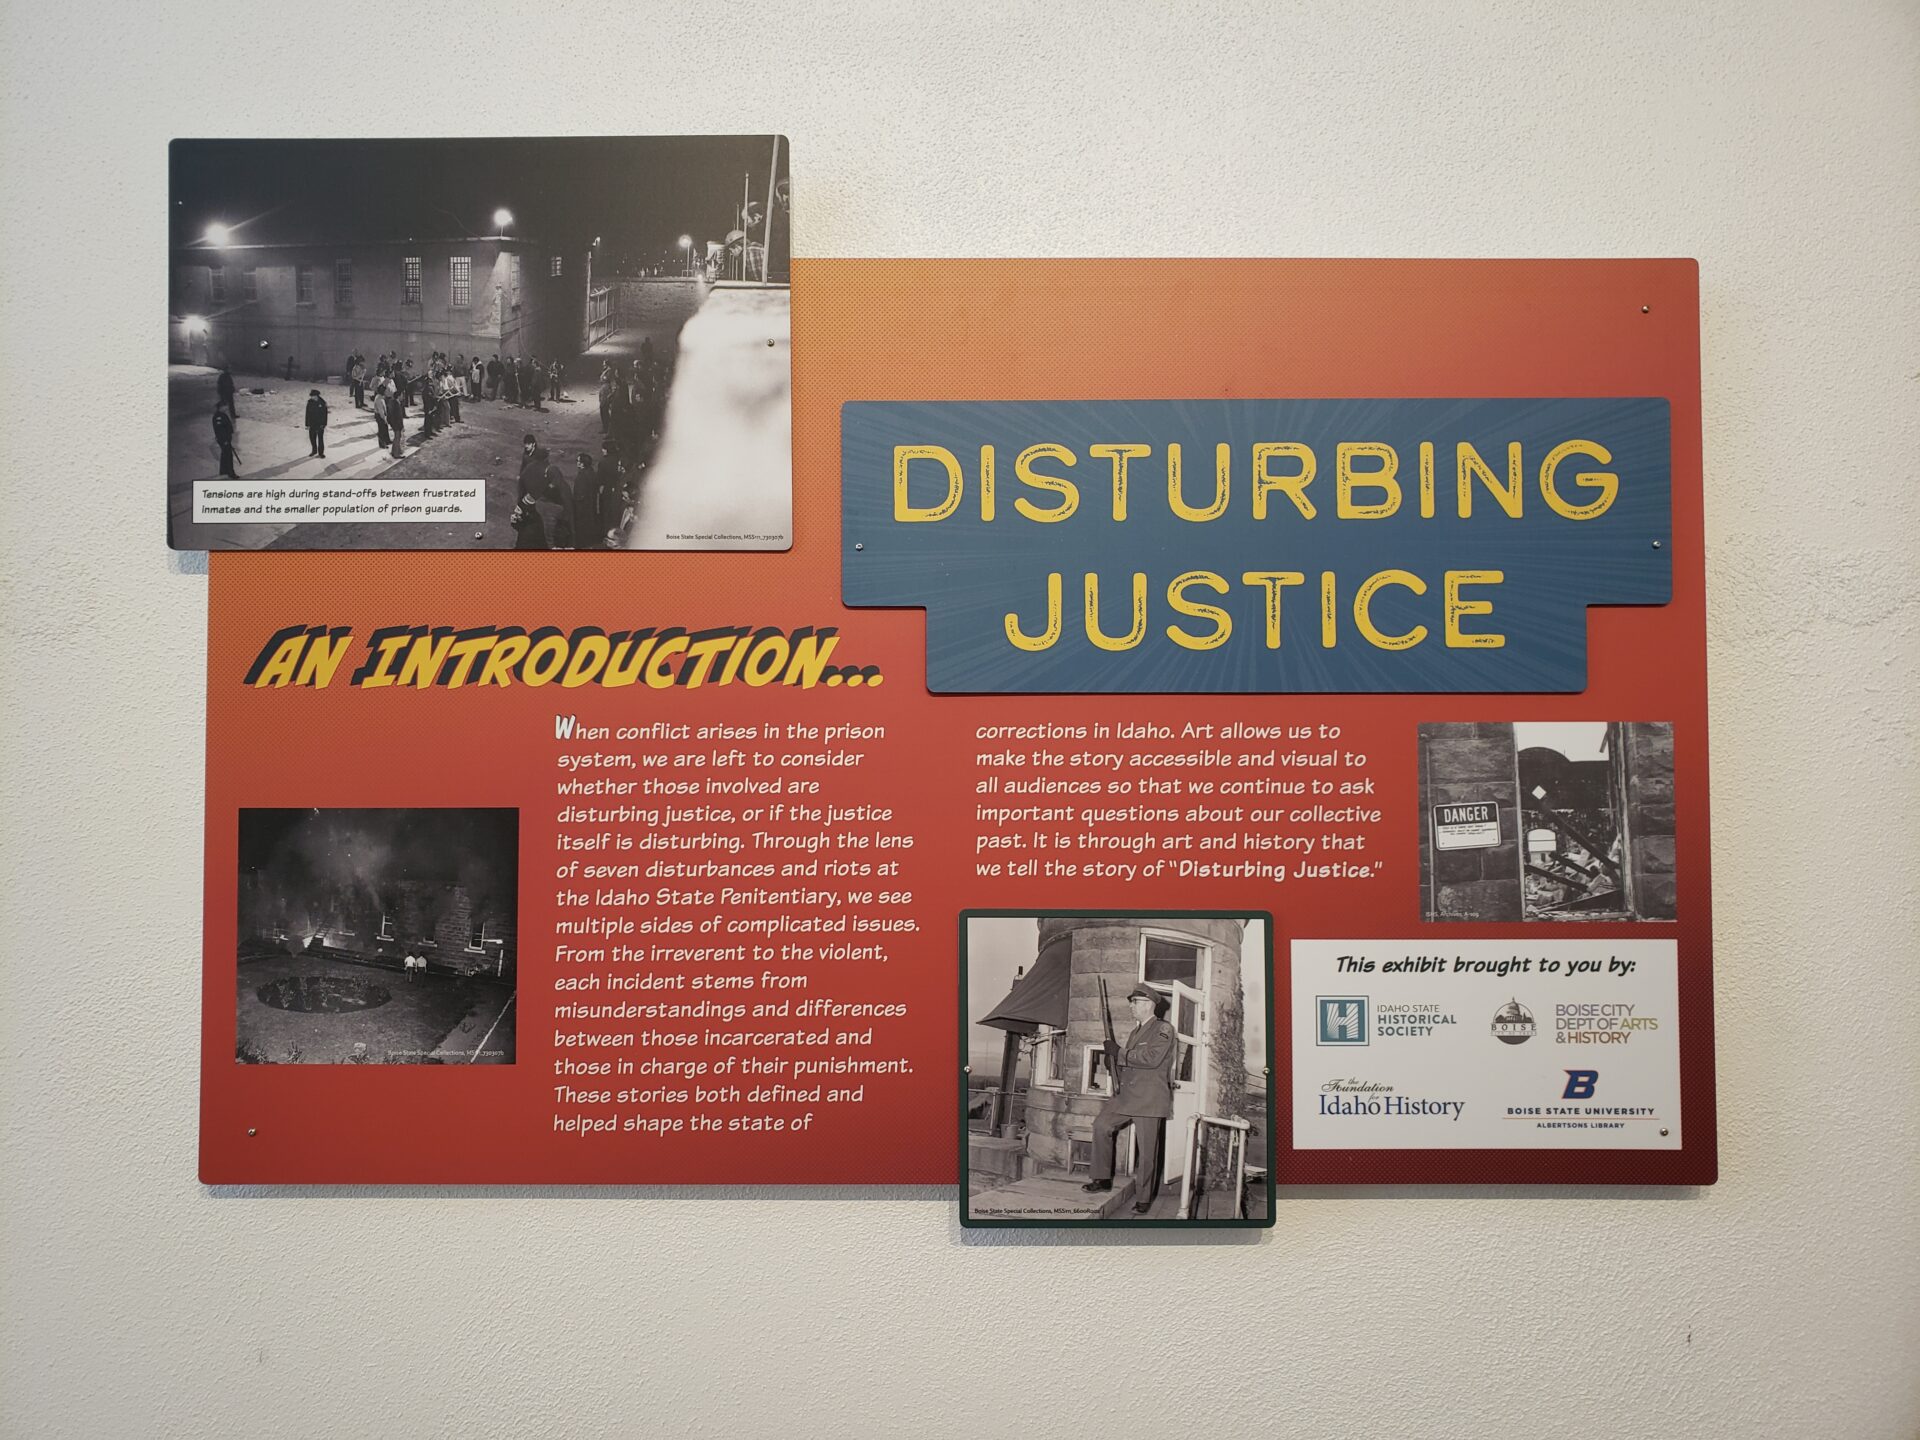 Photograph of opening panel in the Disturbing Justice exhibit, which includes an overview of the exhibition. Photo by Hayley Noblem